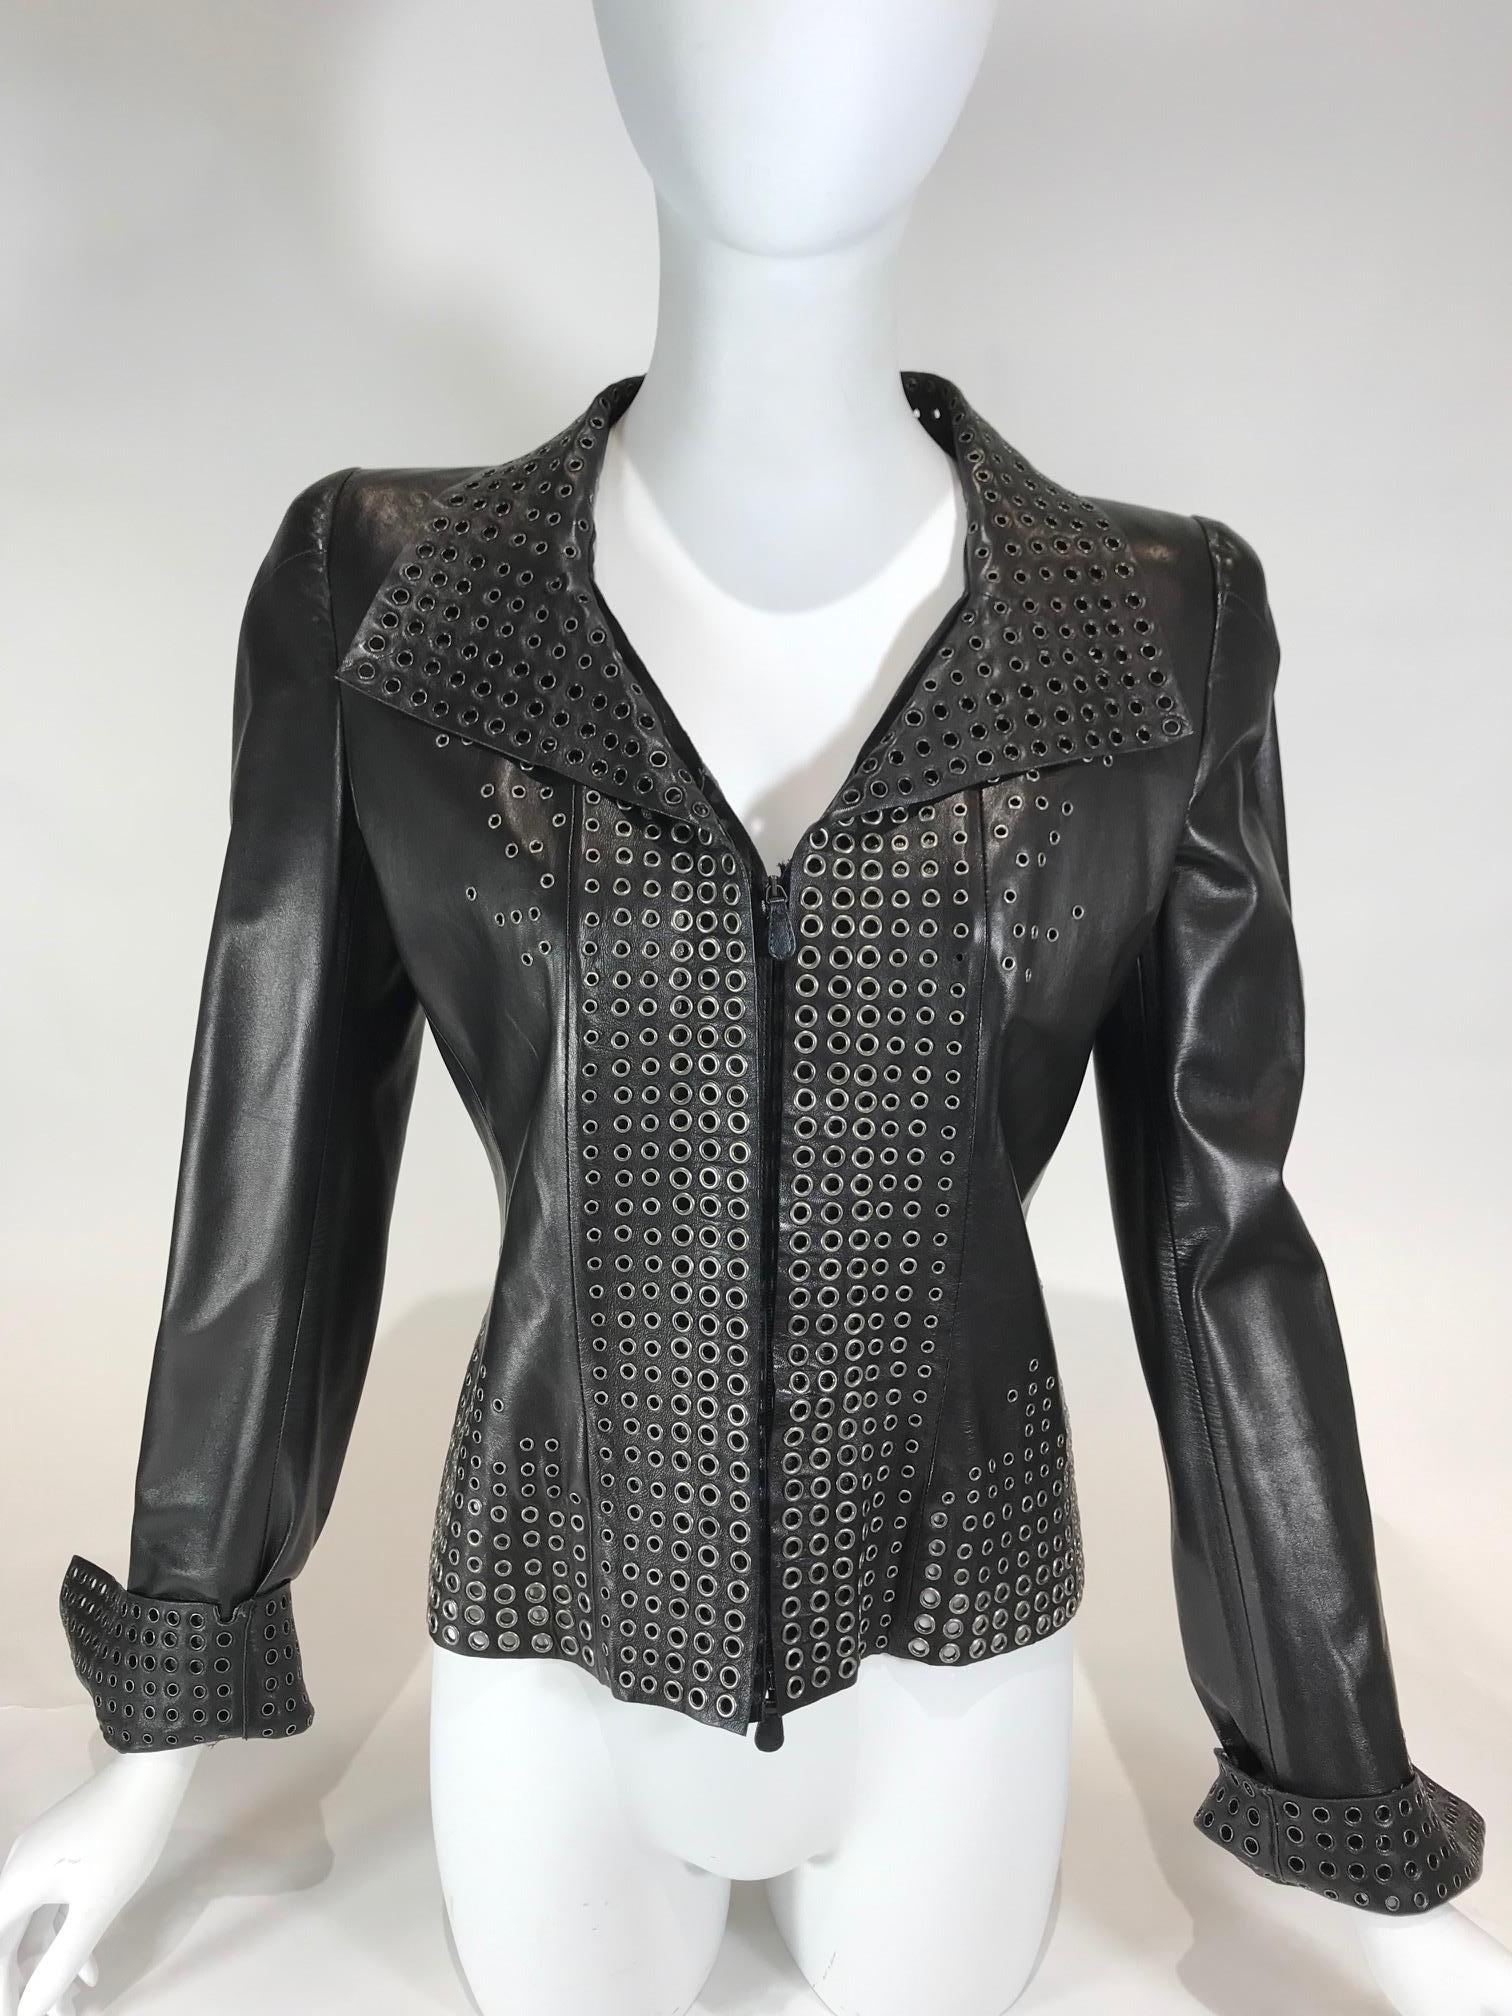 Black leather. Silver-tone hardware. Zipper closure at front. Collared. Featuring grommet design throughout.